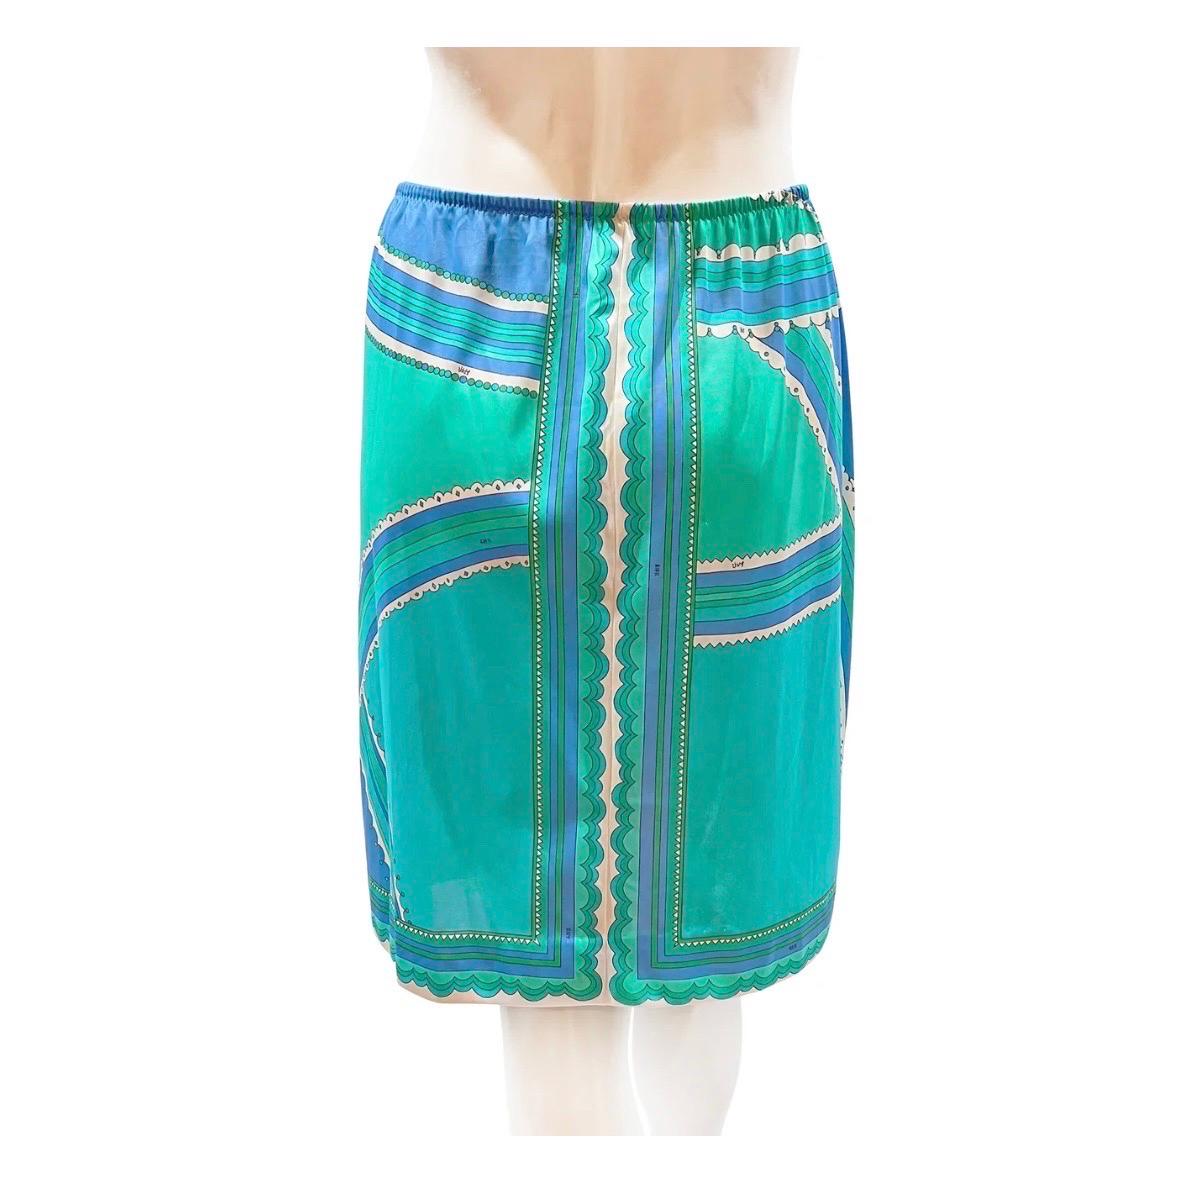 Slip skirt by Emilio Pucci for Formfit Rogers
Made in U.S.A
Aqua, green, periwinkle and white geometric print
Elastic waist 
Just above knee-length 
100% nylon
Condition: Great, zero visible wear. 
Size/Measurements:
Size Medium 
25